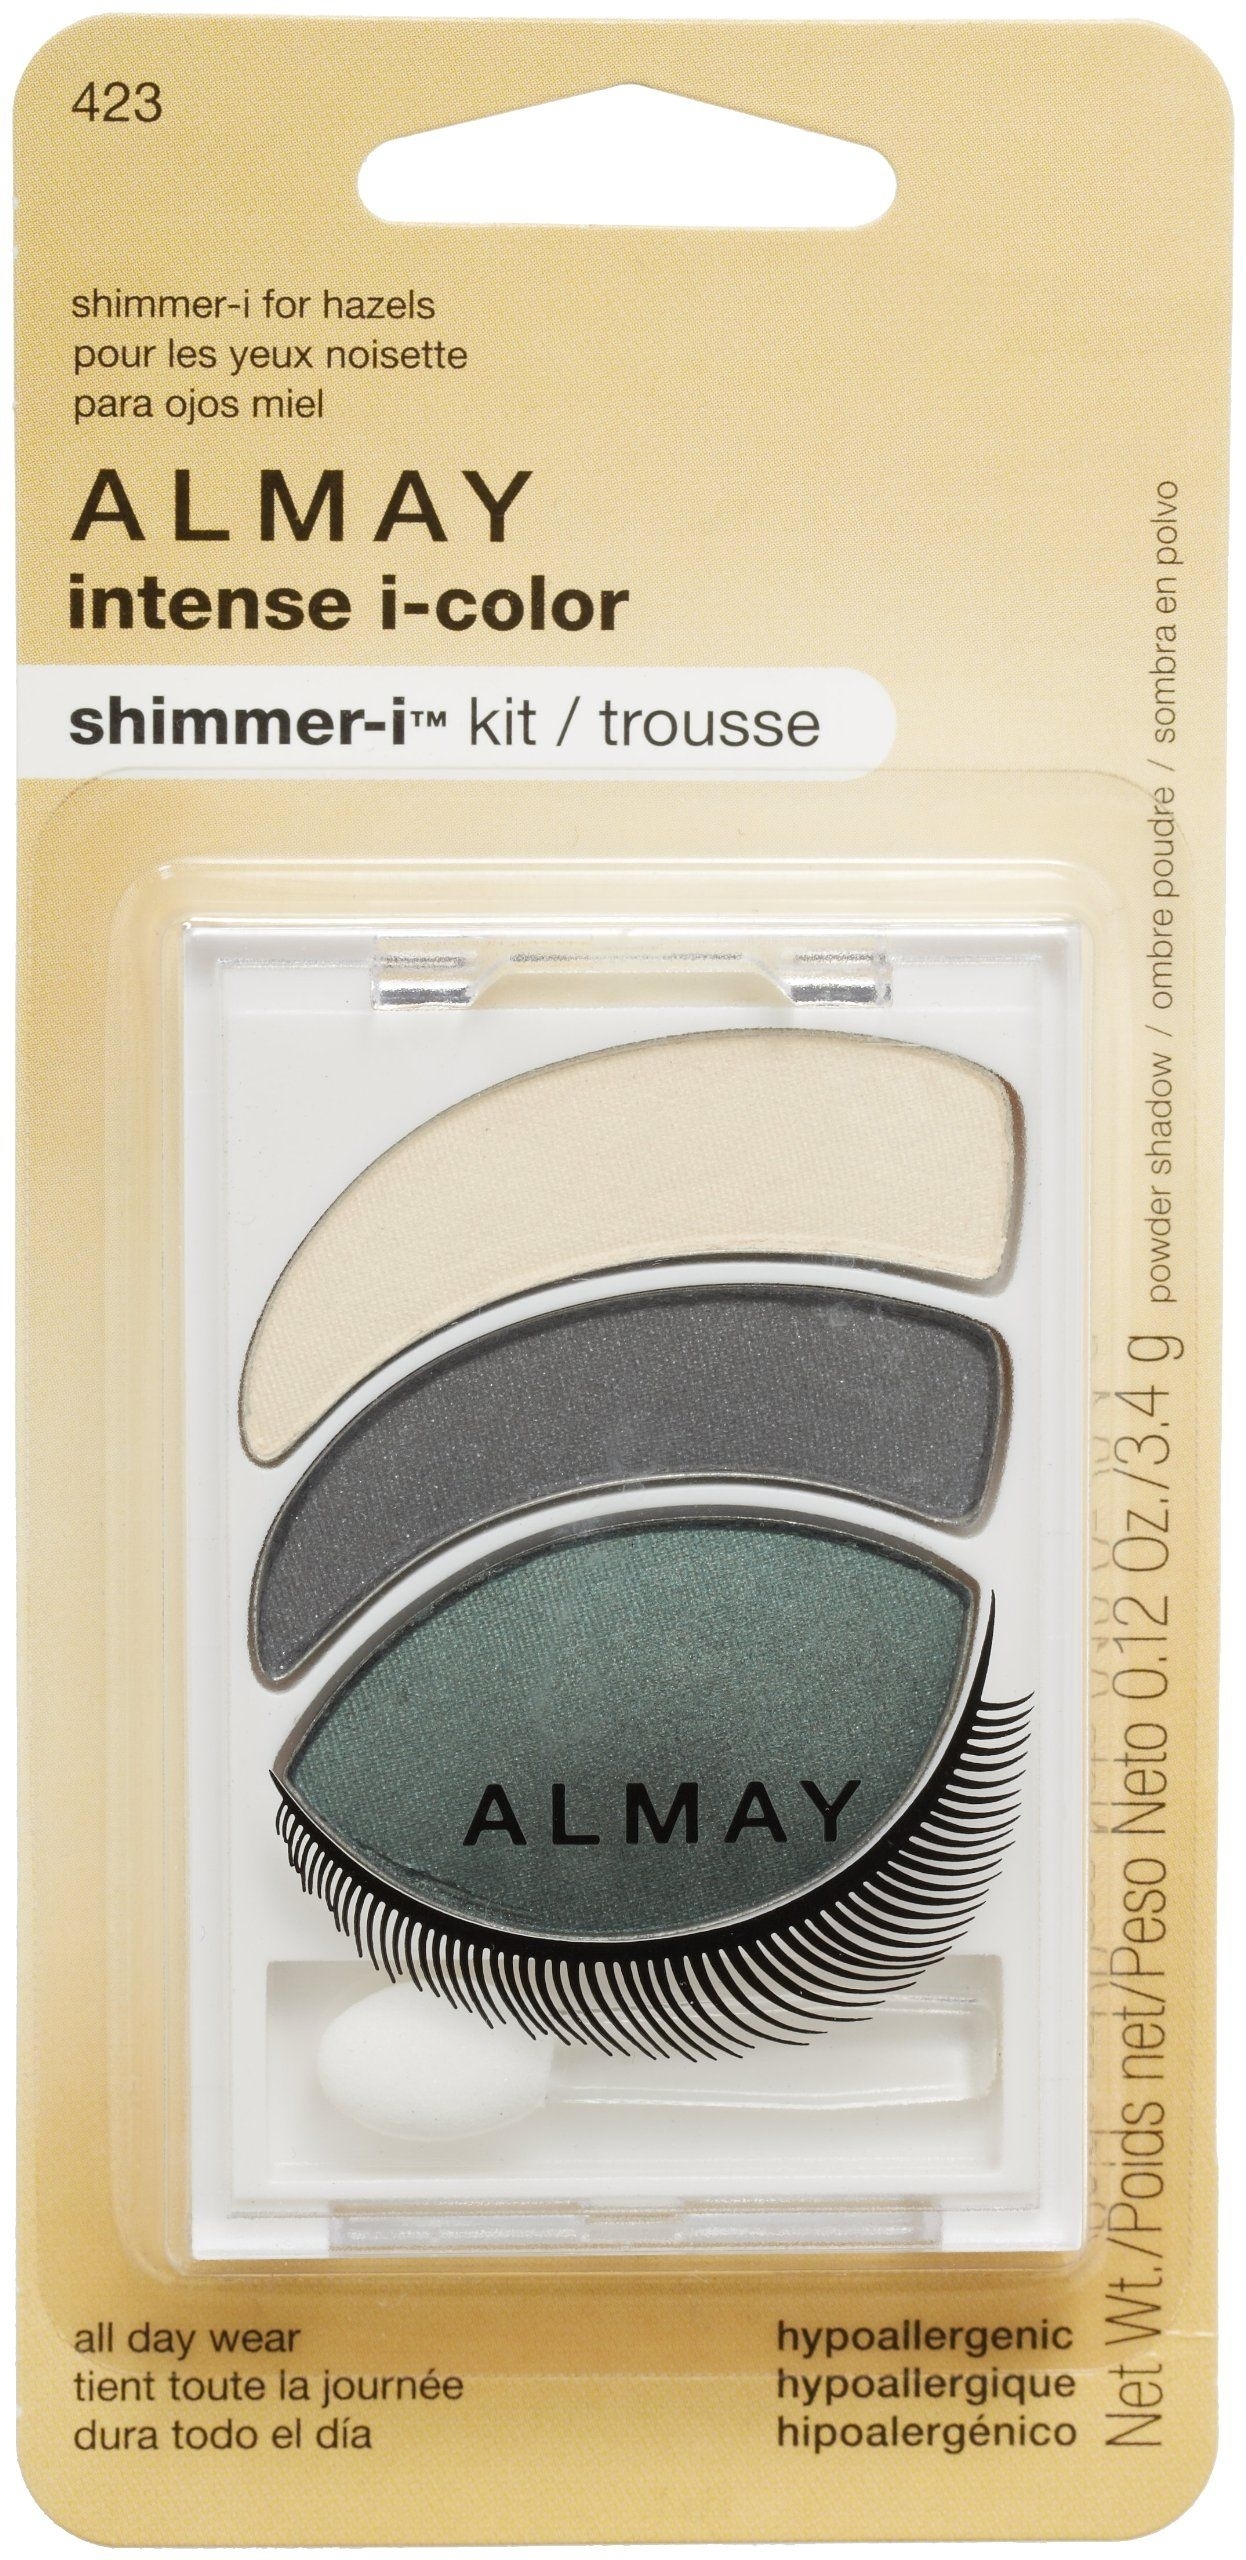 Almay Intense Icolor Shimmeri Kit Hazel &gt;&gt;&gt; Details Can Be with How To Put On Almay Intense I-Color For Hazel Eyes